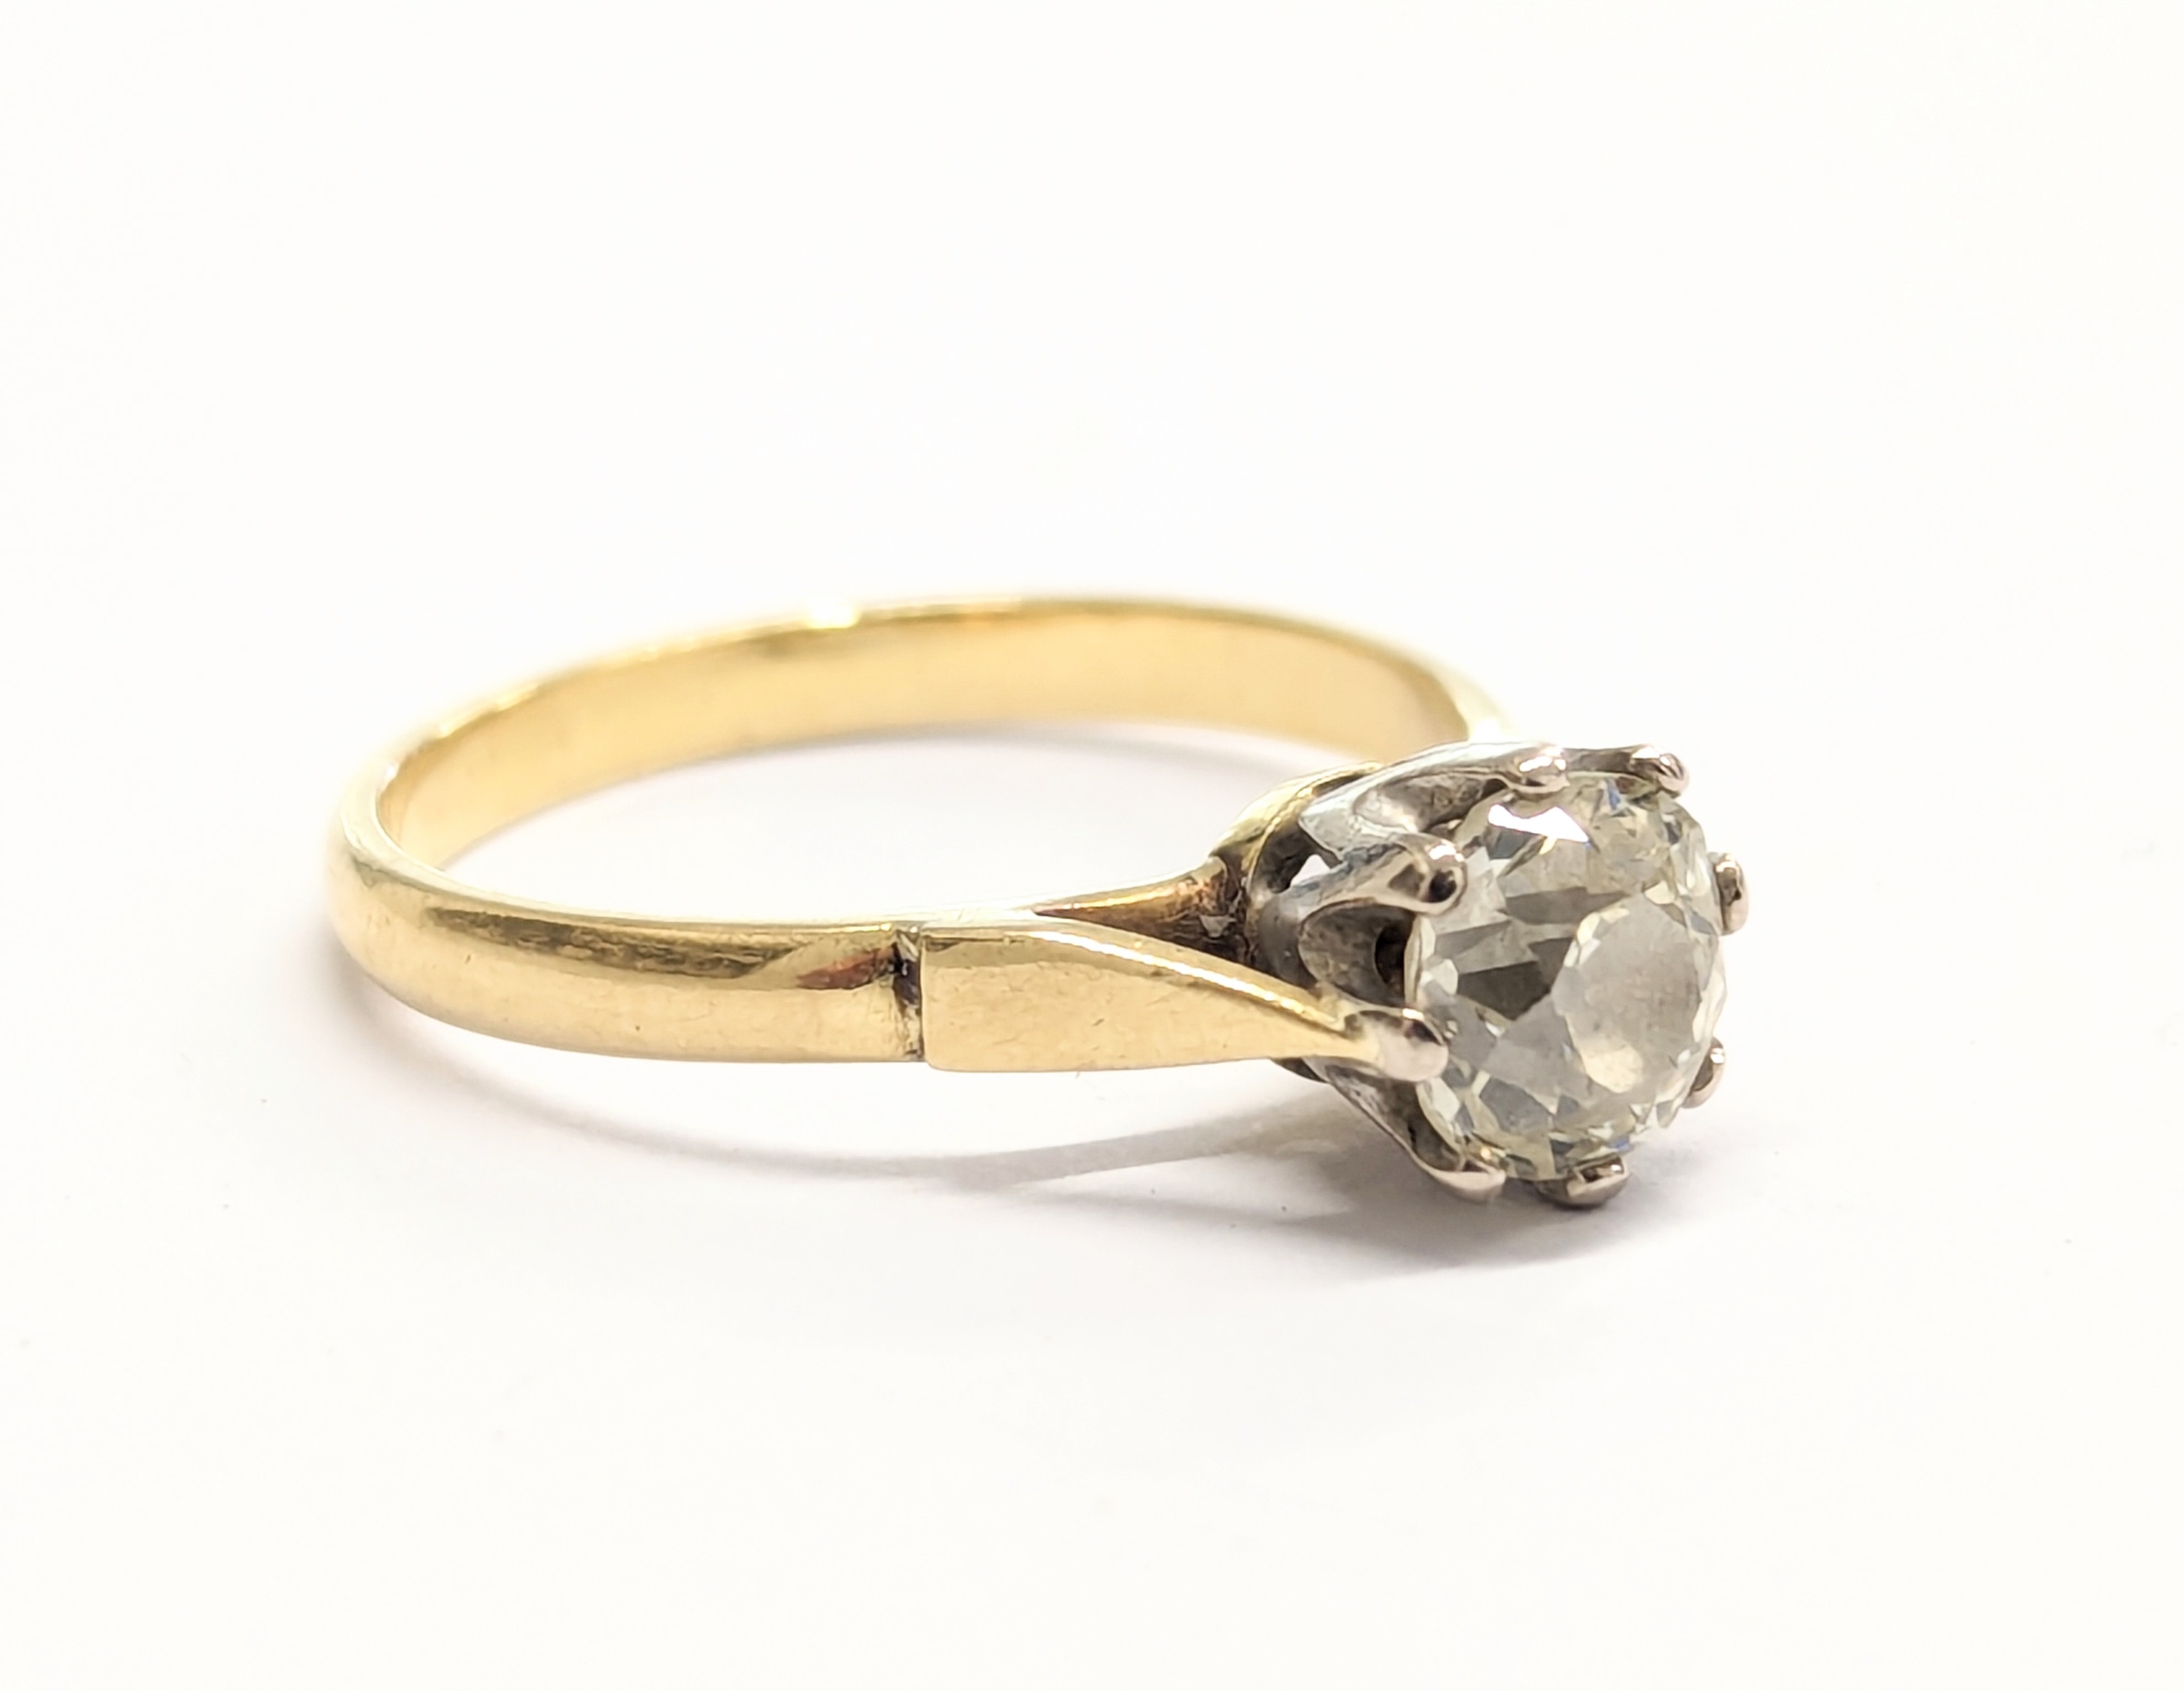 An 18ct gold, Victorian rose cut diamond solitaire ring. Diamond is 1.20ct. UK size P. - Image 2 of 4